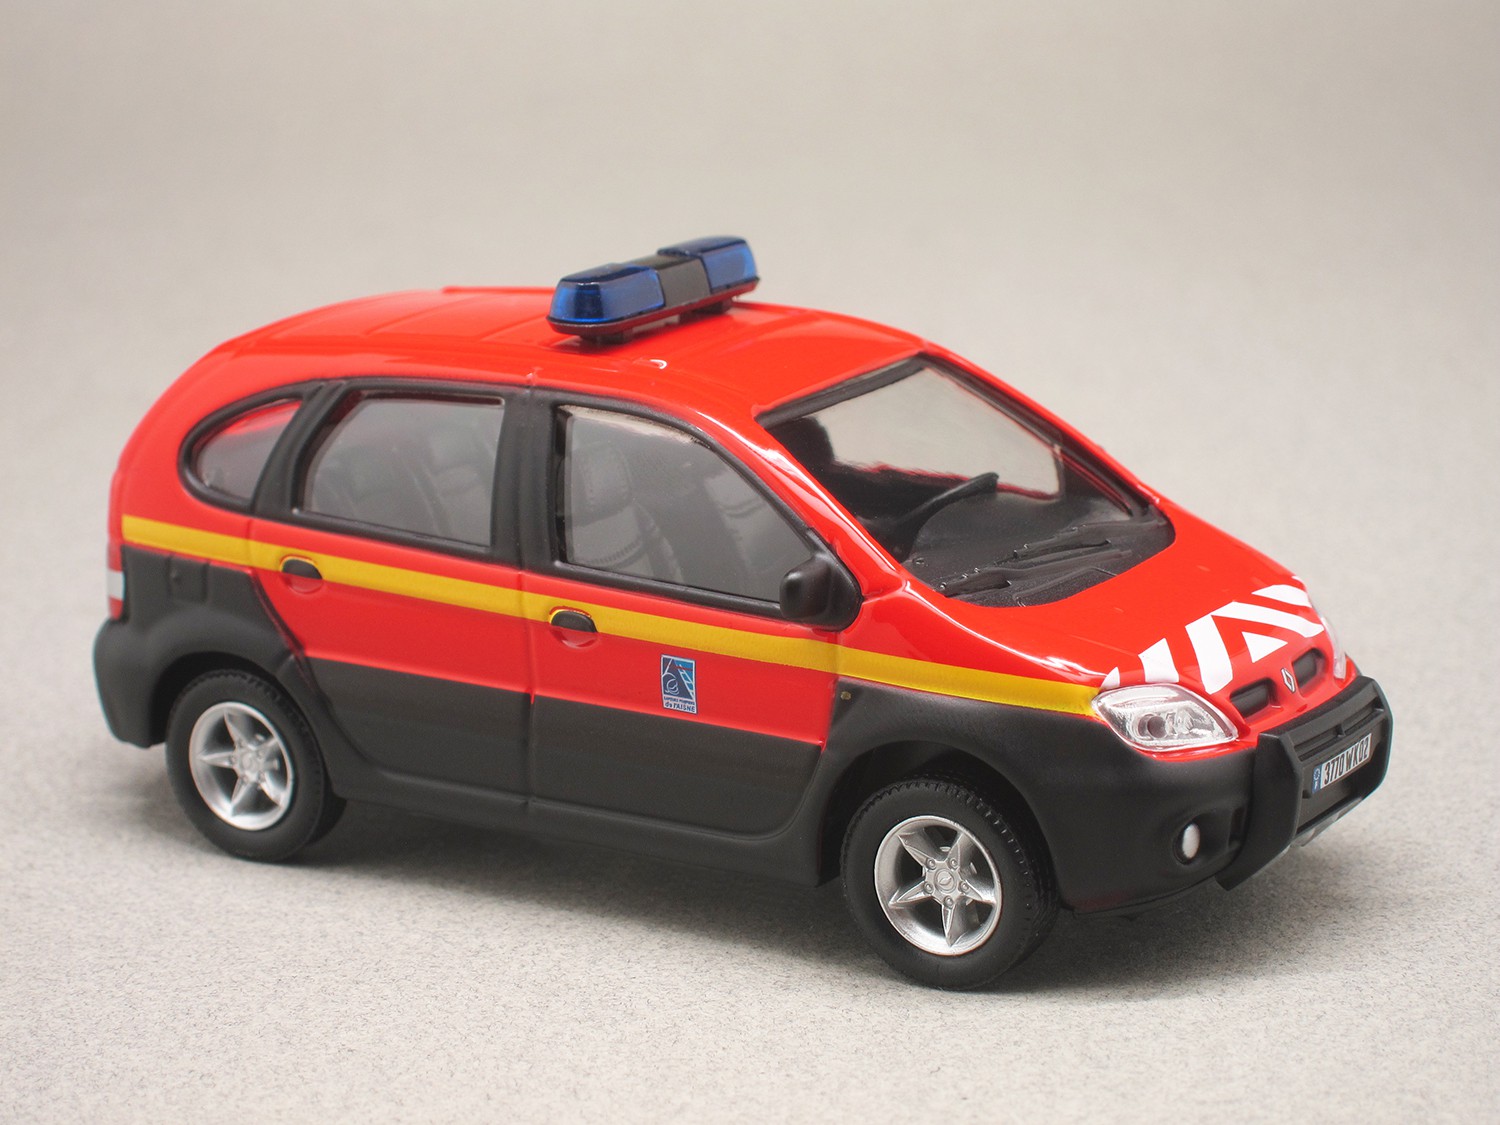 Renault Scénic RX4 fire rescue (Oliex) 1:43